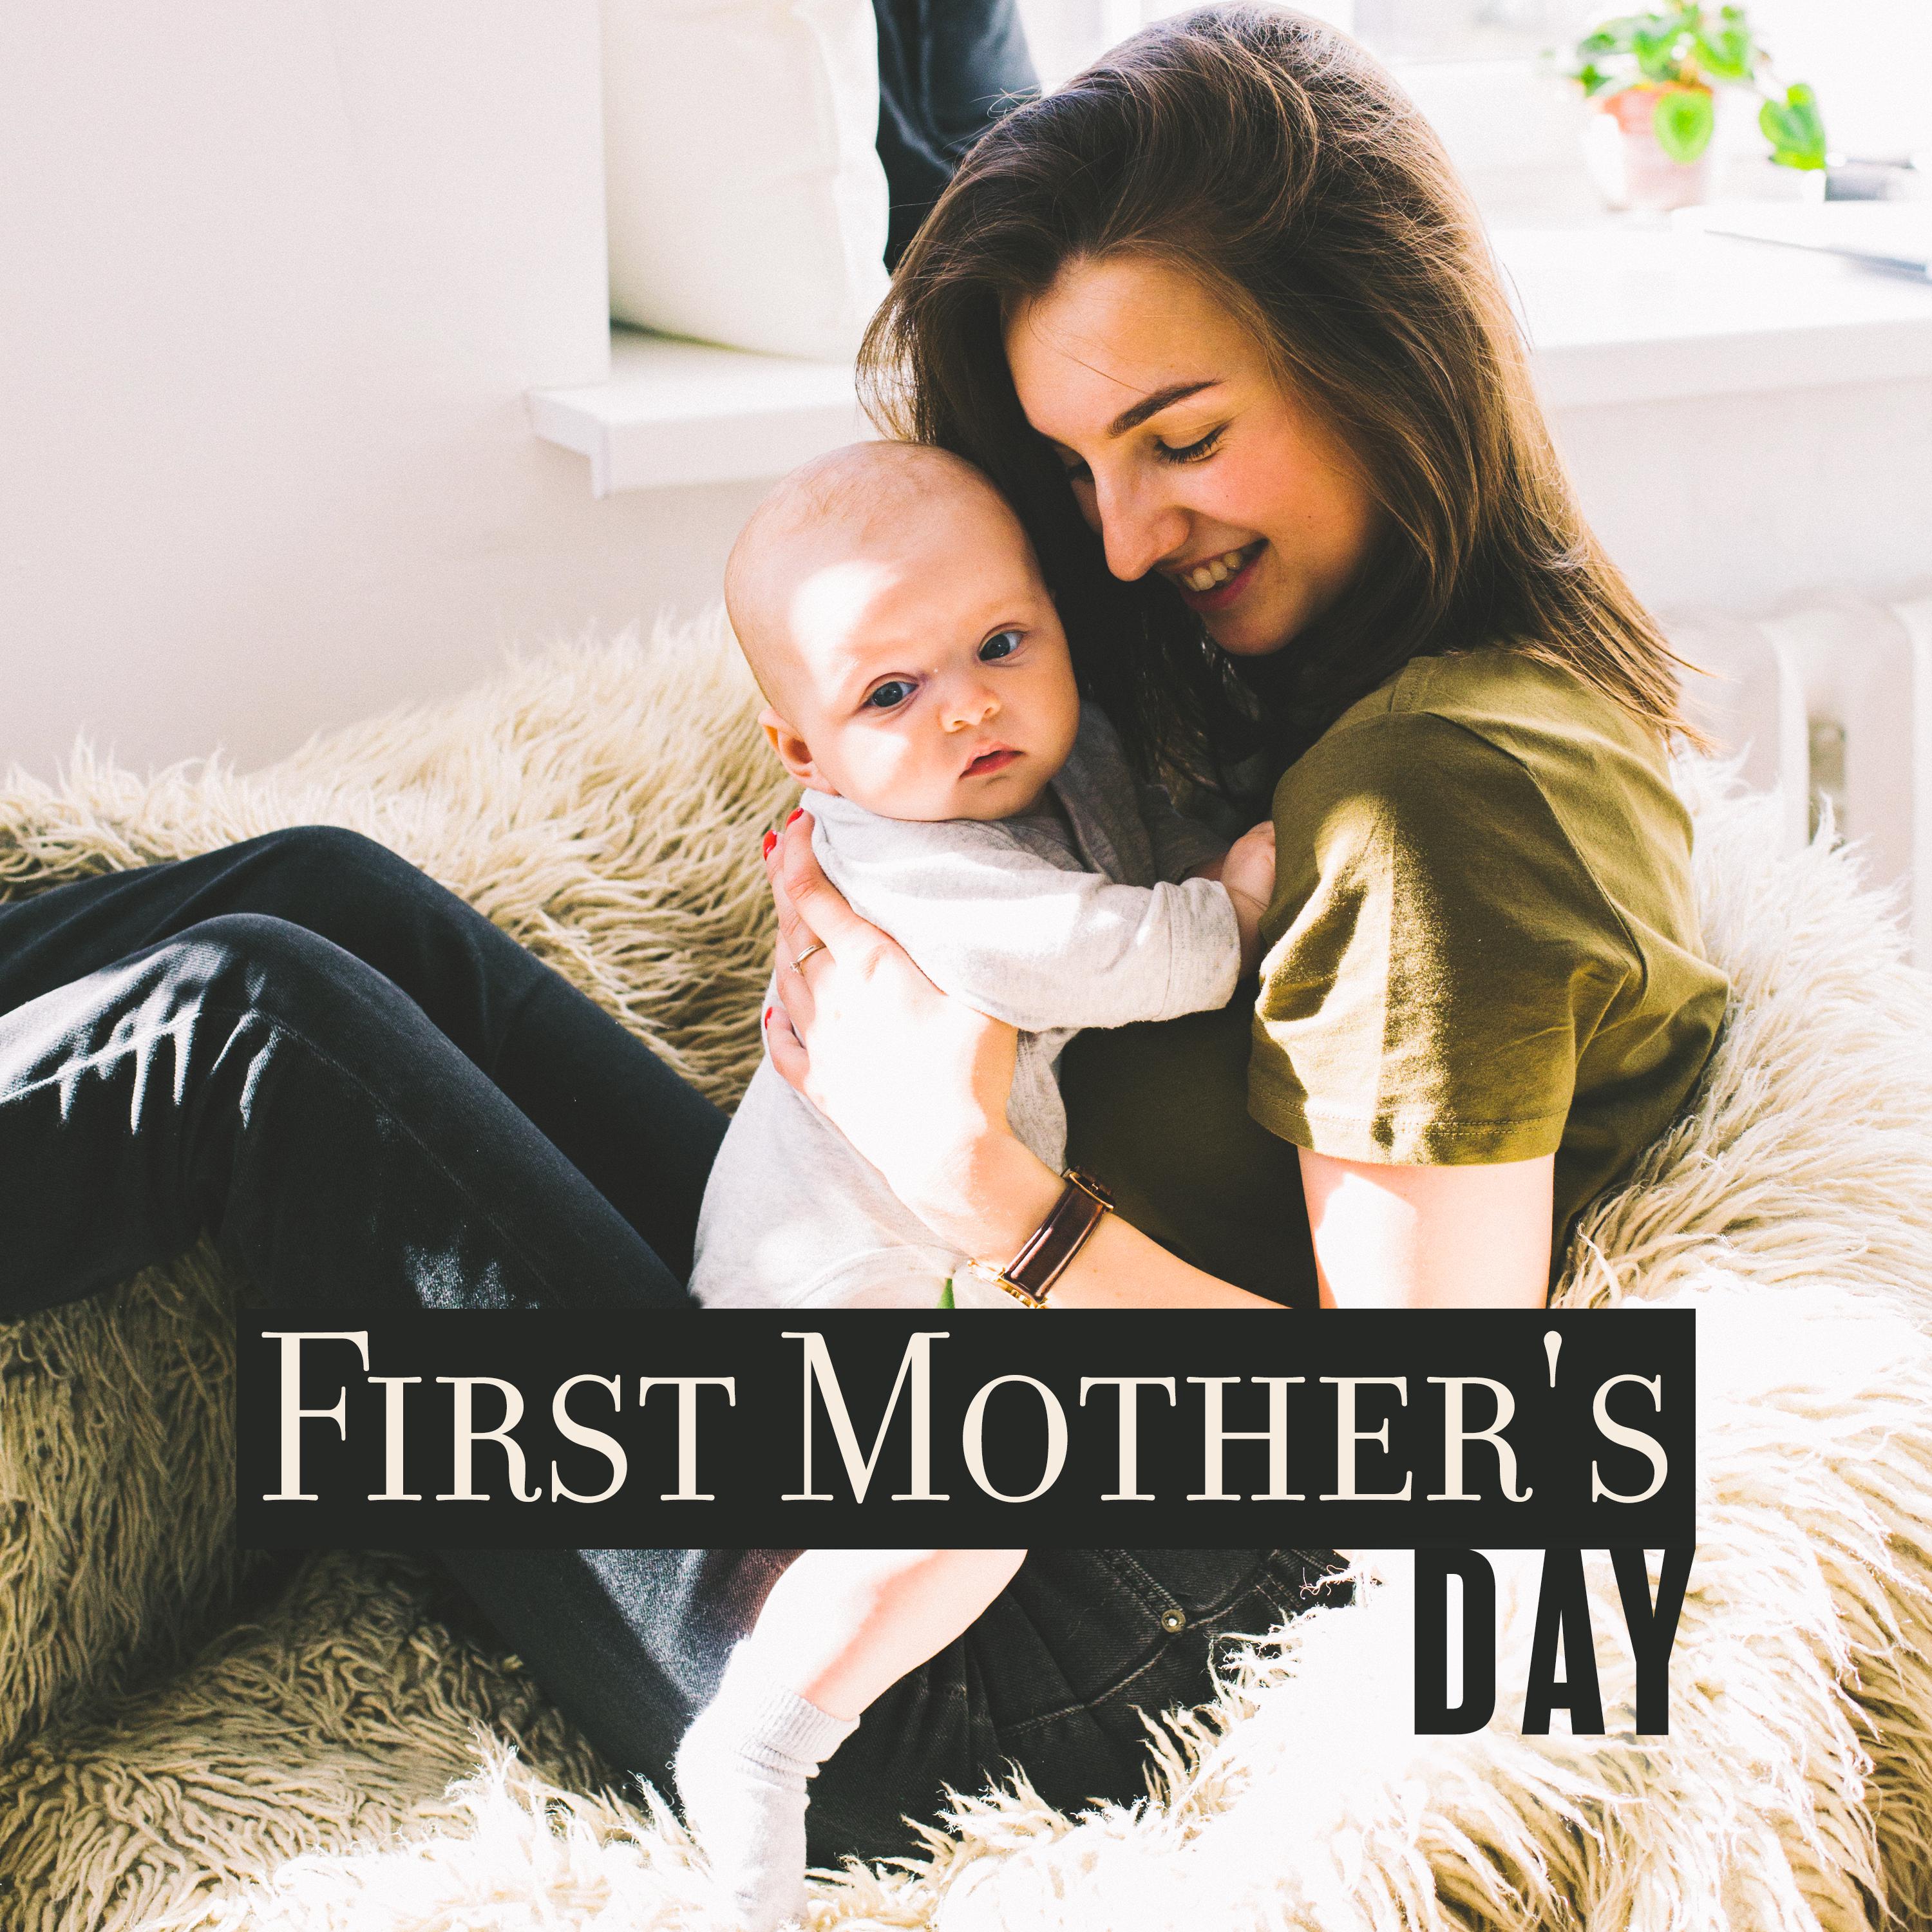 First Mother's Day: Relaxing Piano Songs for Mother and Newborn Baby